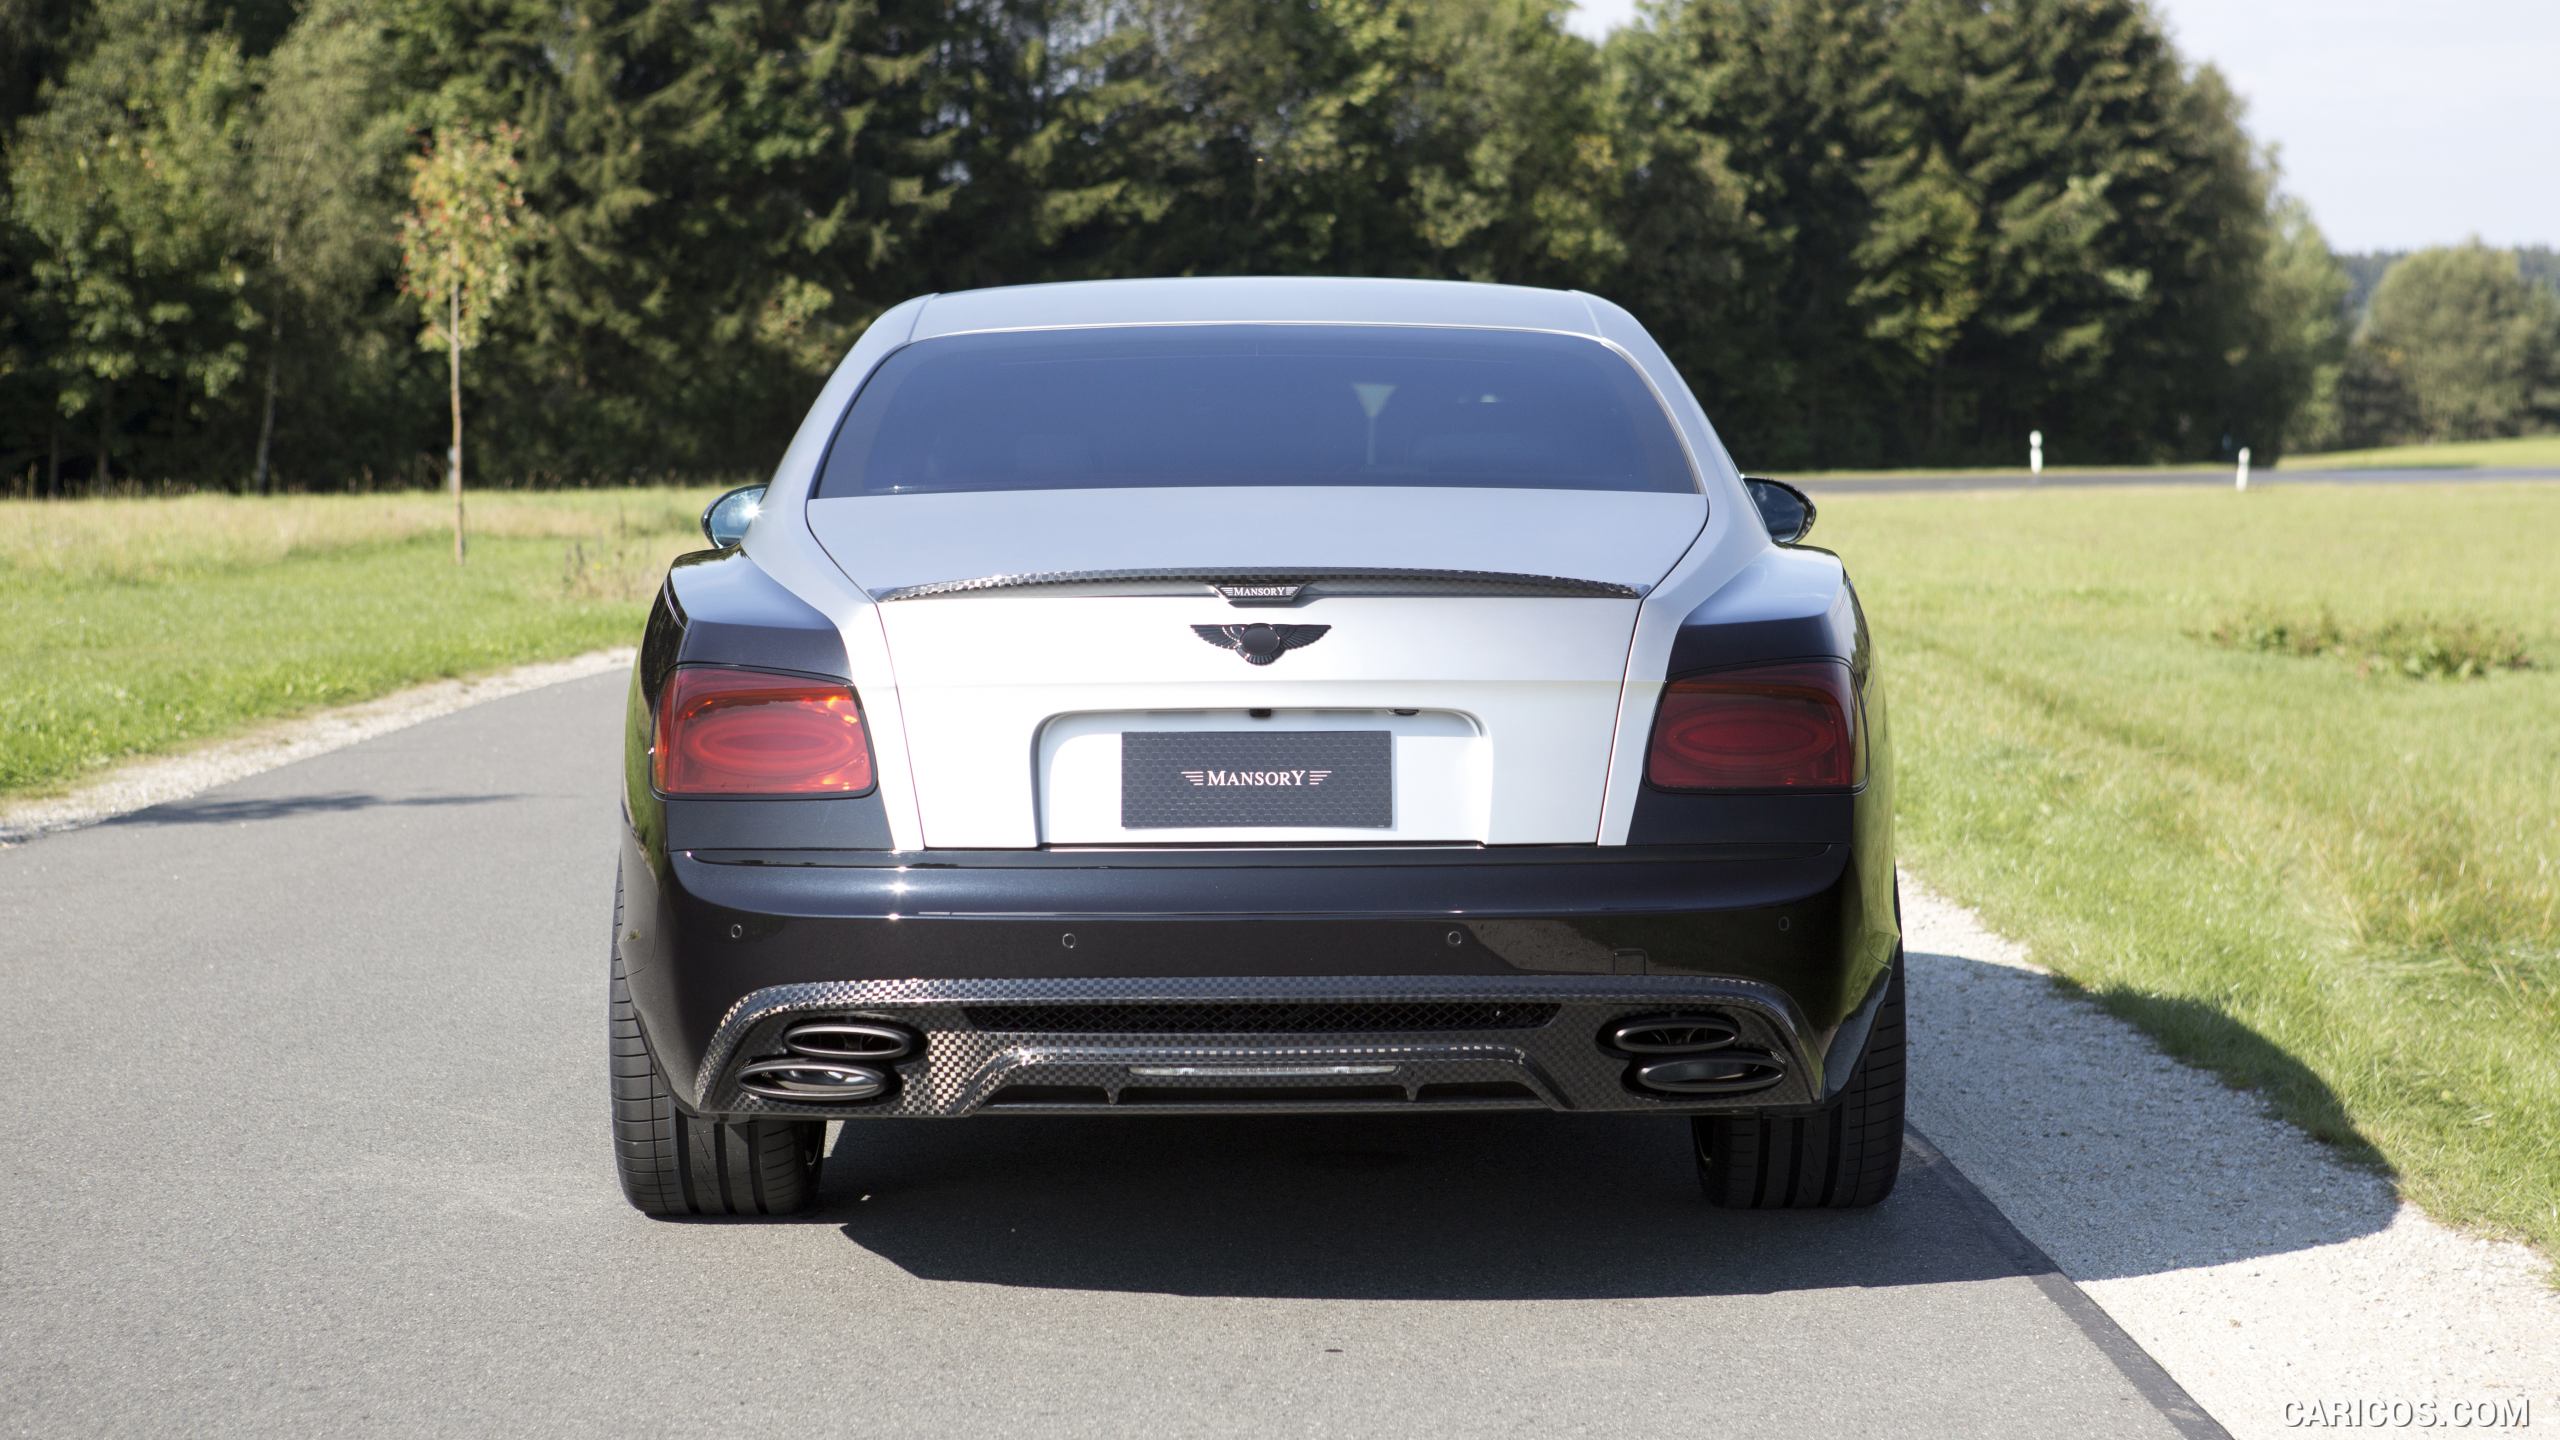 2015 MANSORY Bentley Flying Spur - Rear, #5 of 9